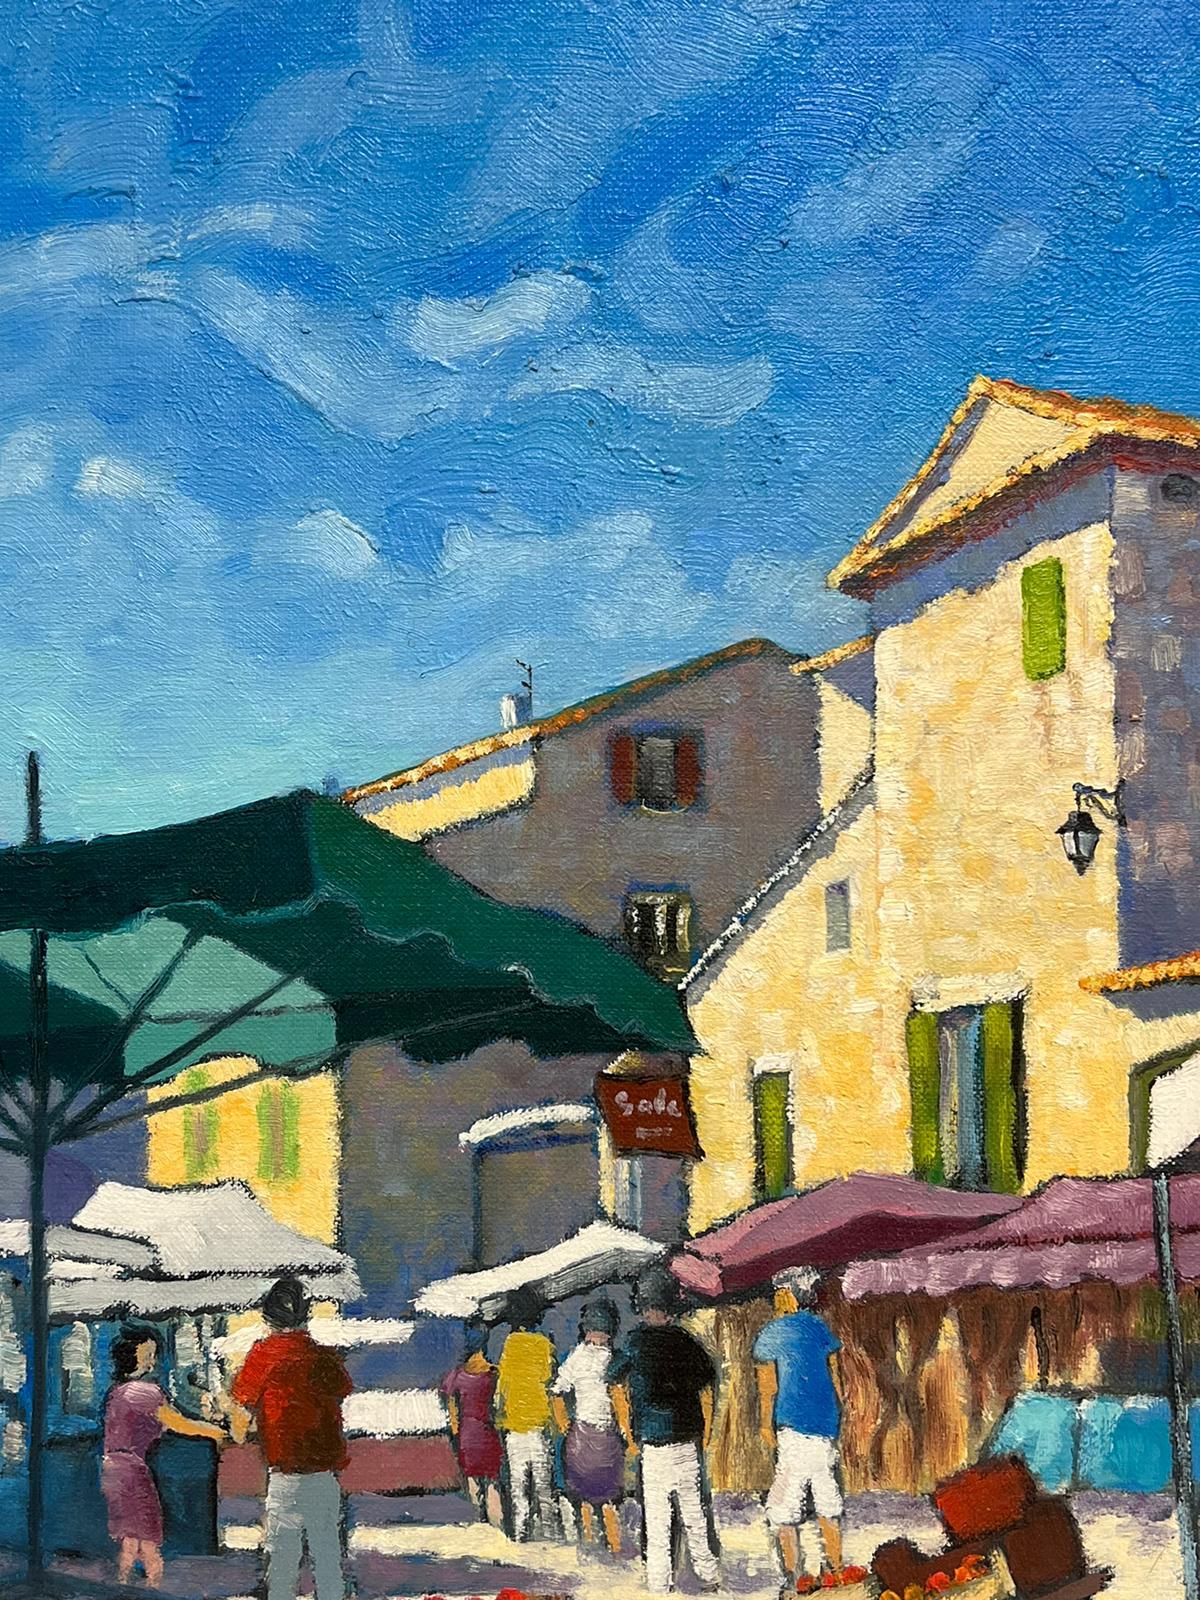 Place de l'Elige, Lacoste, 
French artist, signed and dated
oil on canvas, unframed
canvas: 22 x 18.5 inches
inscribed verso
provenance: private collection, France
condition: very good and sound condition